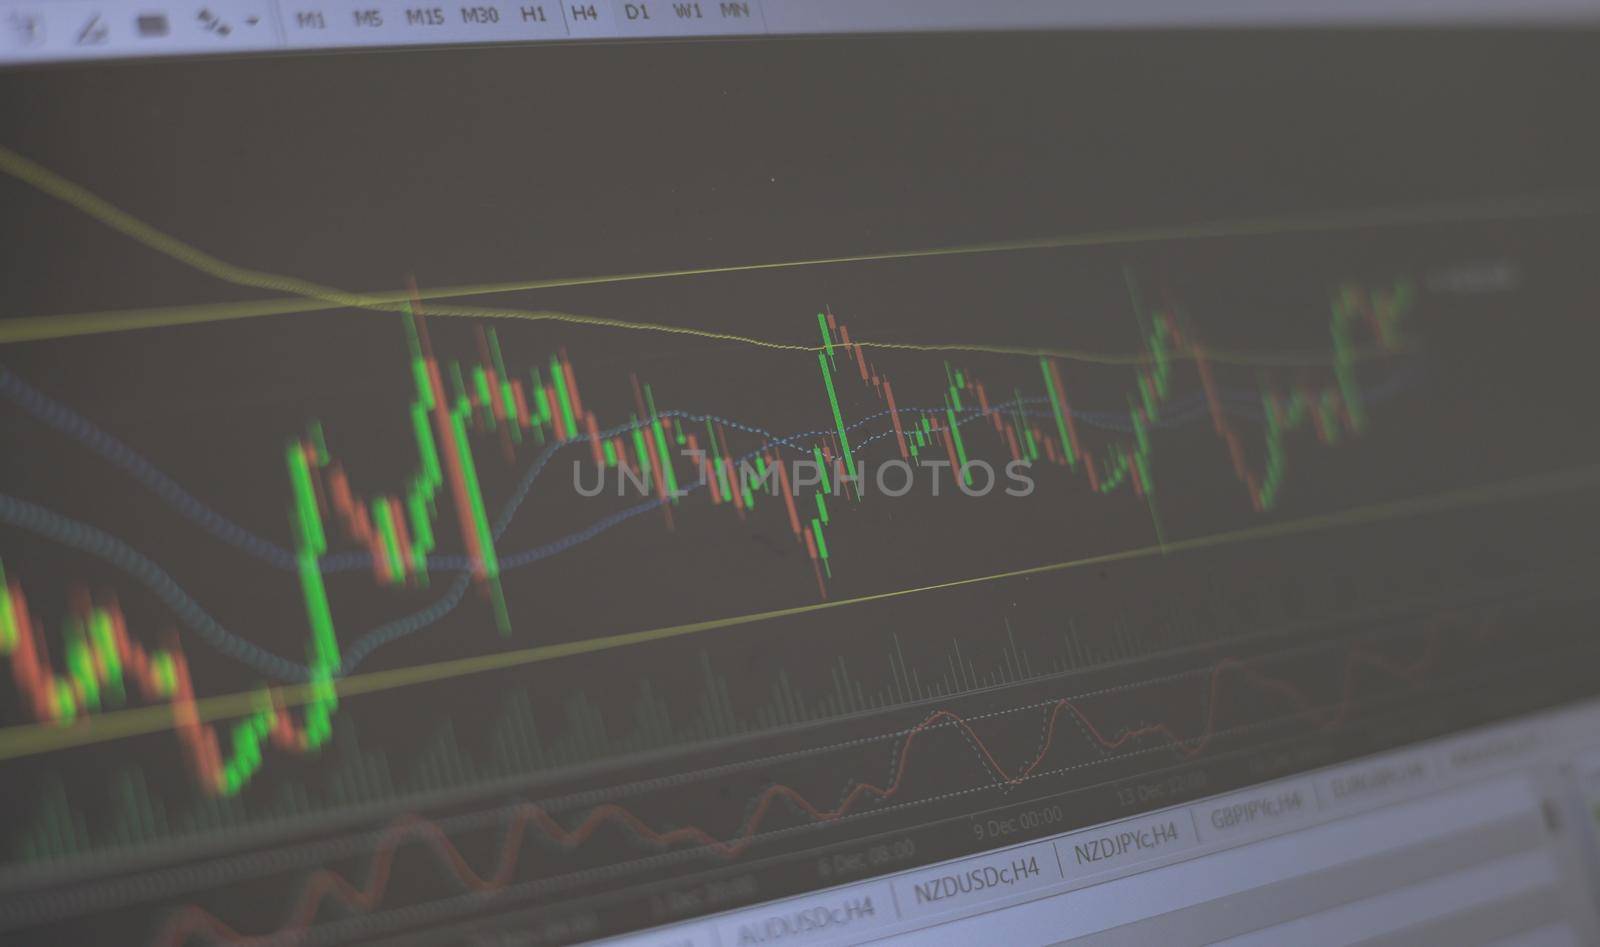 Cryptocurrency stock chart concept. Stock quotes. Online trading screen mock up. Candle stick graph chart with indicator showing bullish point or bearish point. Stock market or stock exchange trading.